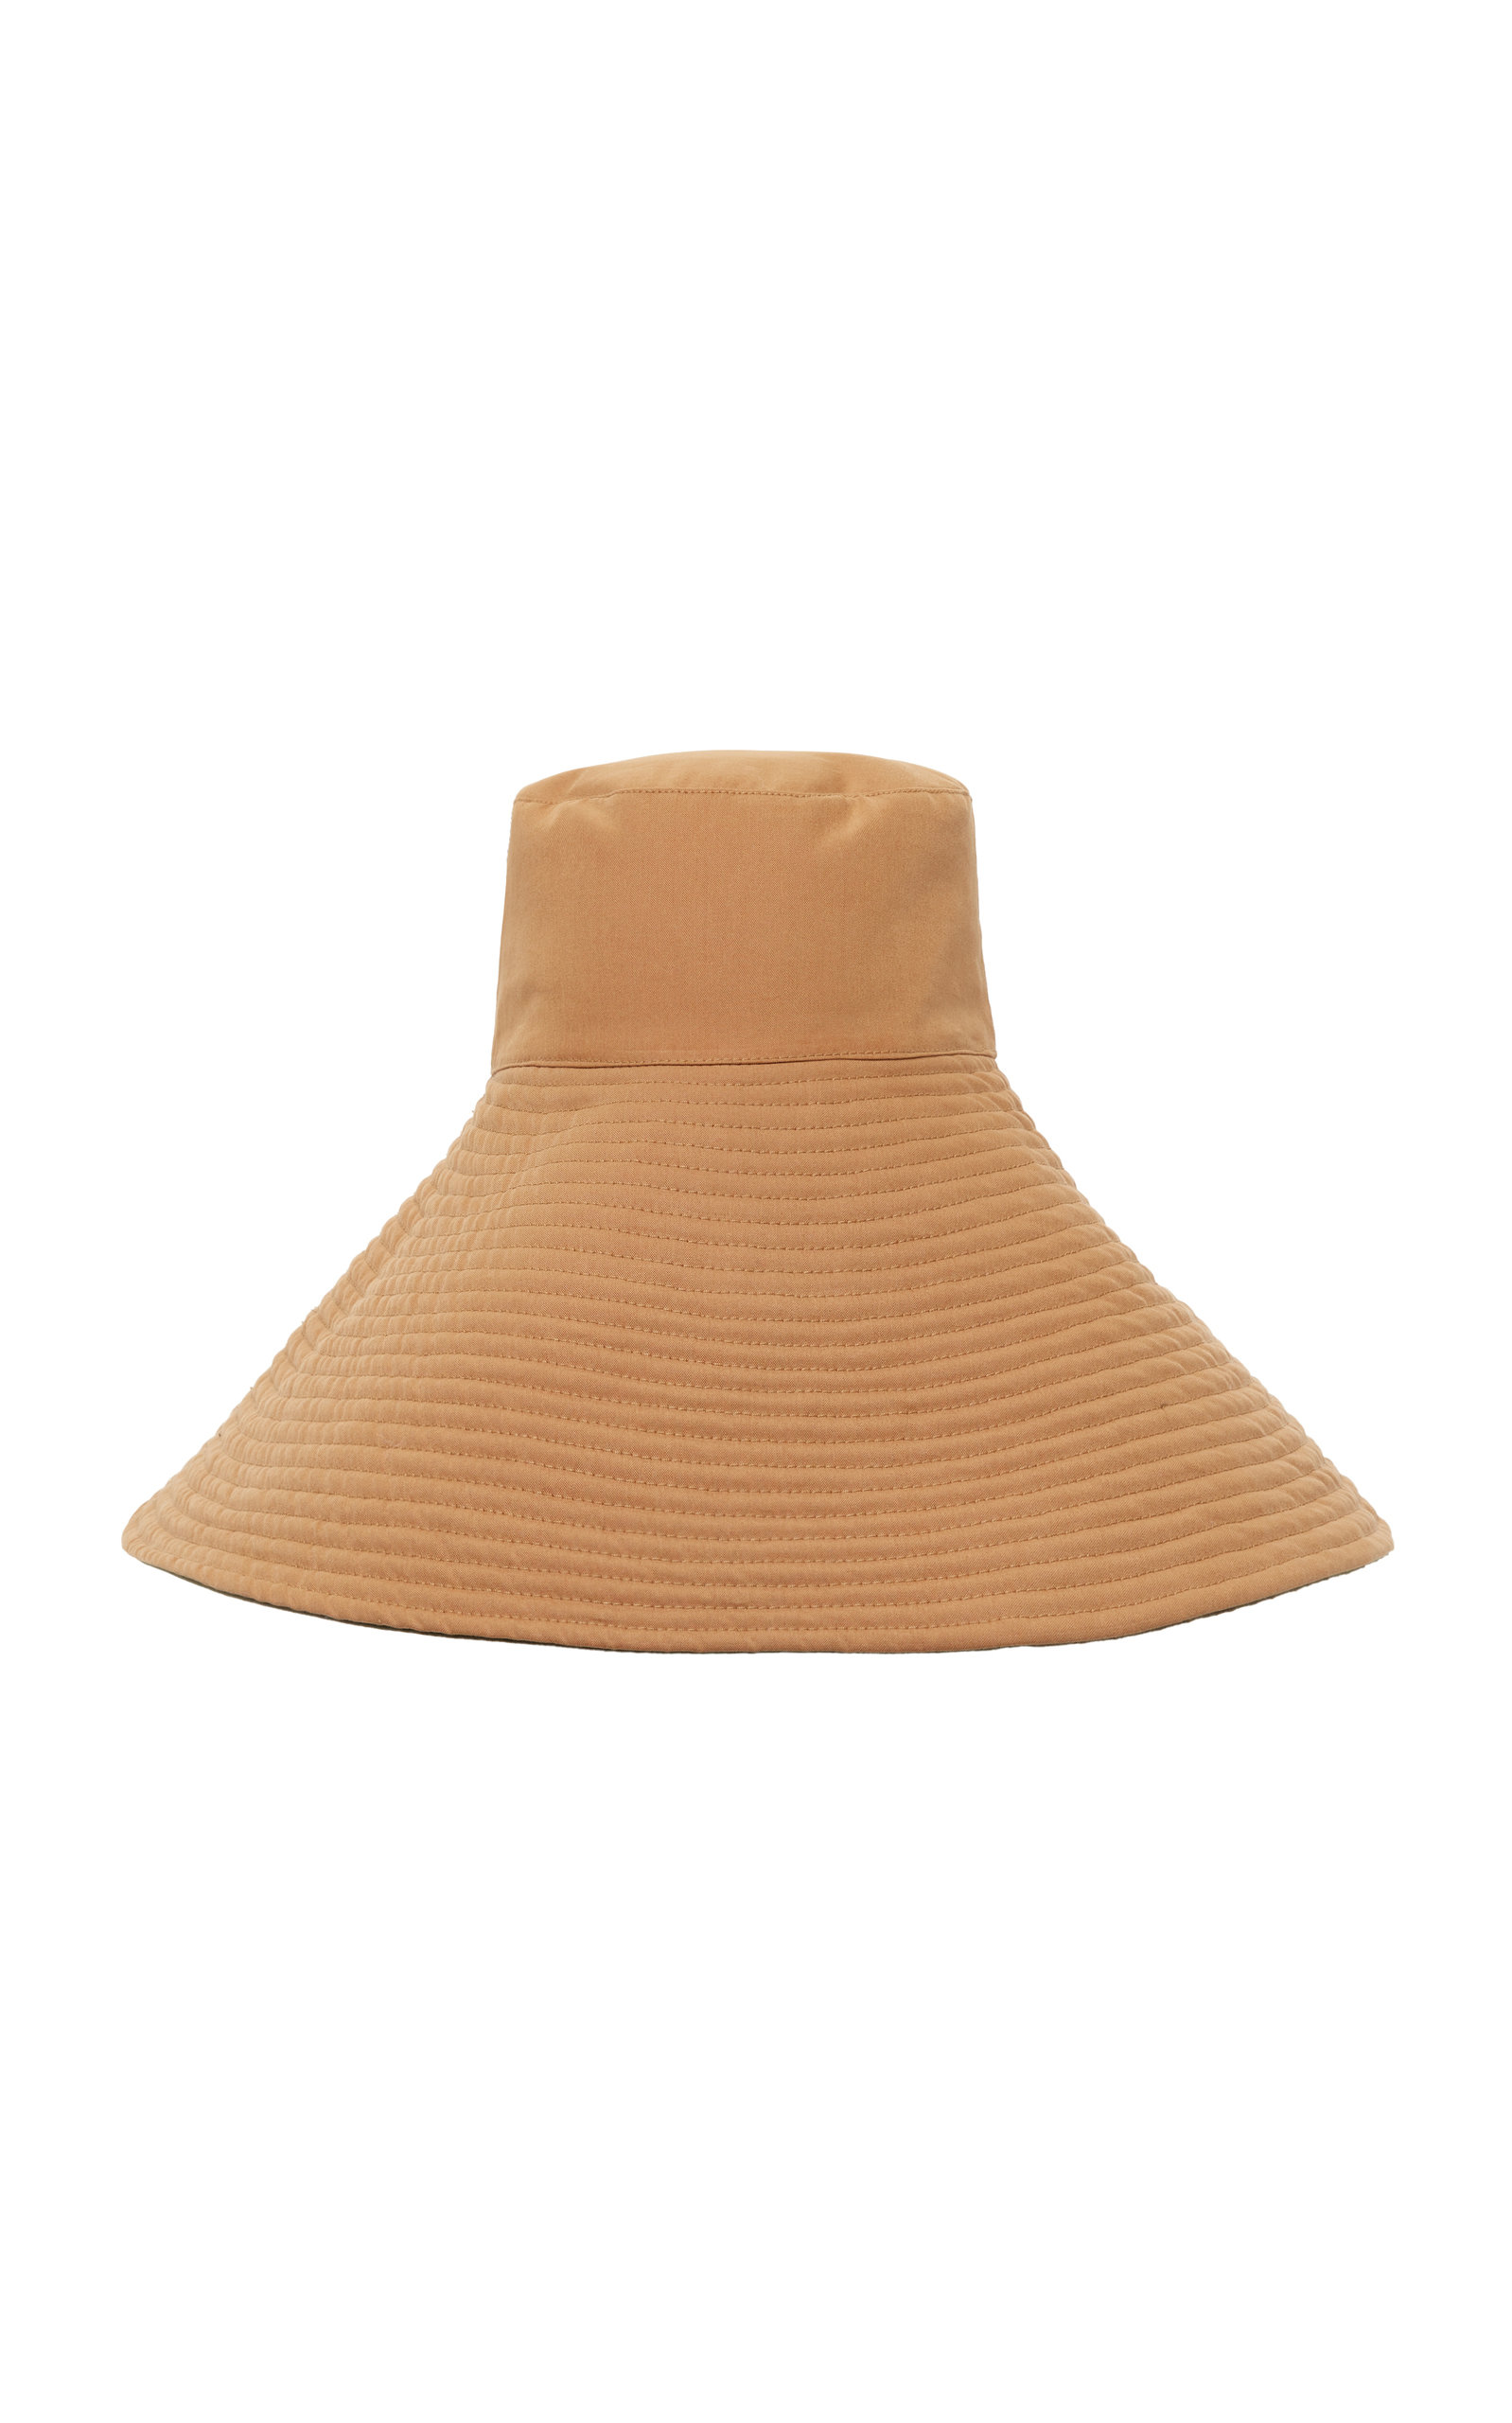 Made for A Woman MW Chapeau Straw Bucket Hat - Neutrals